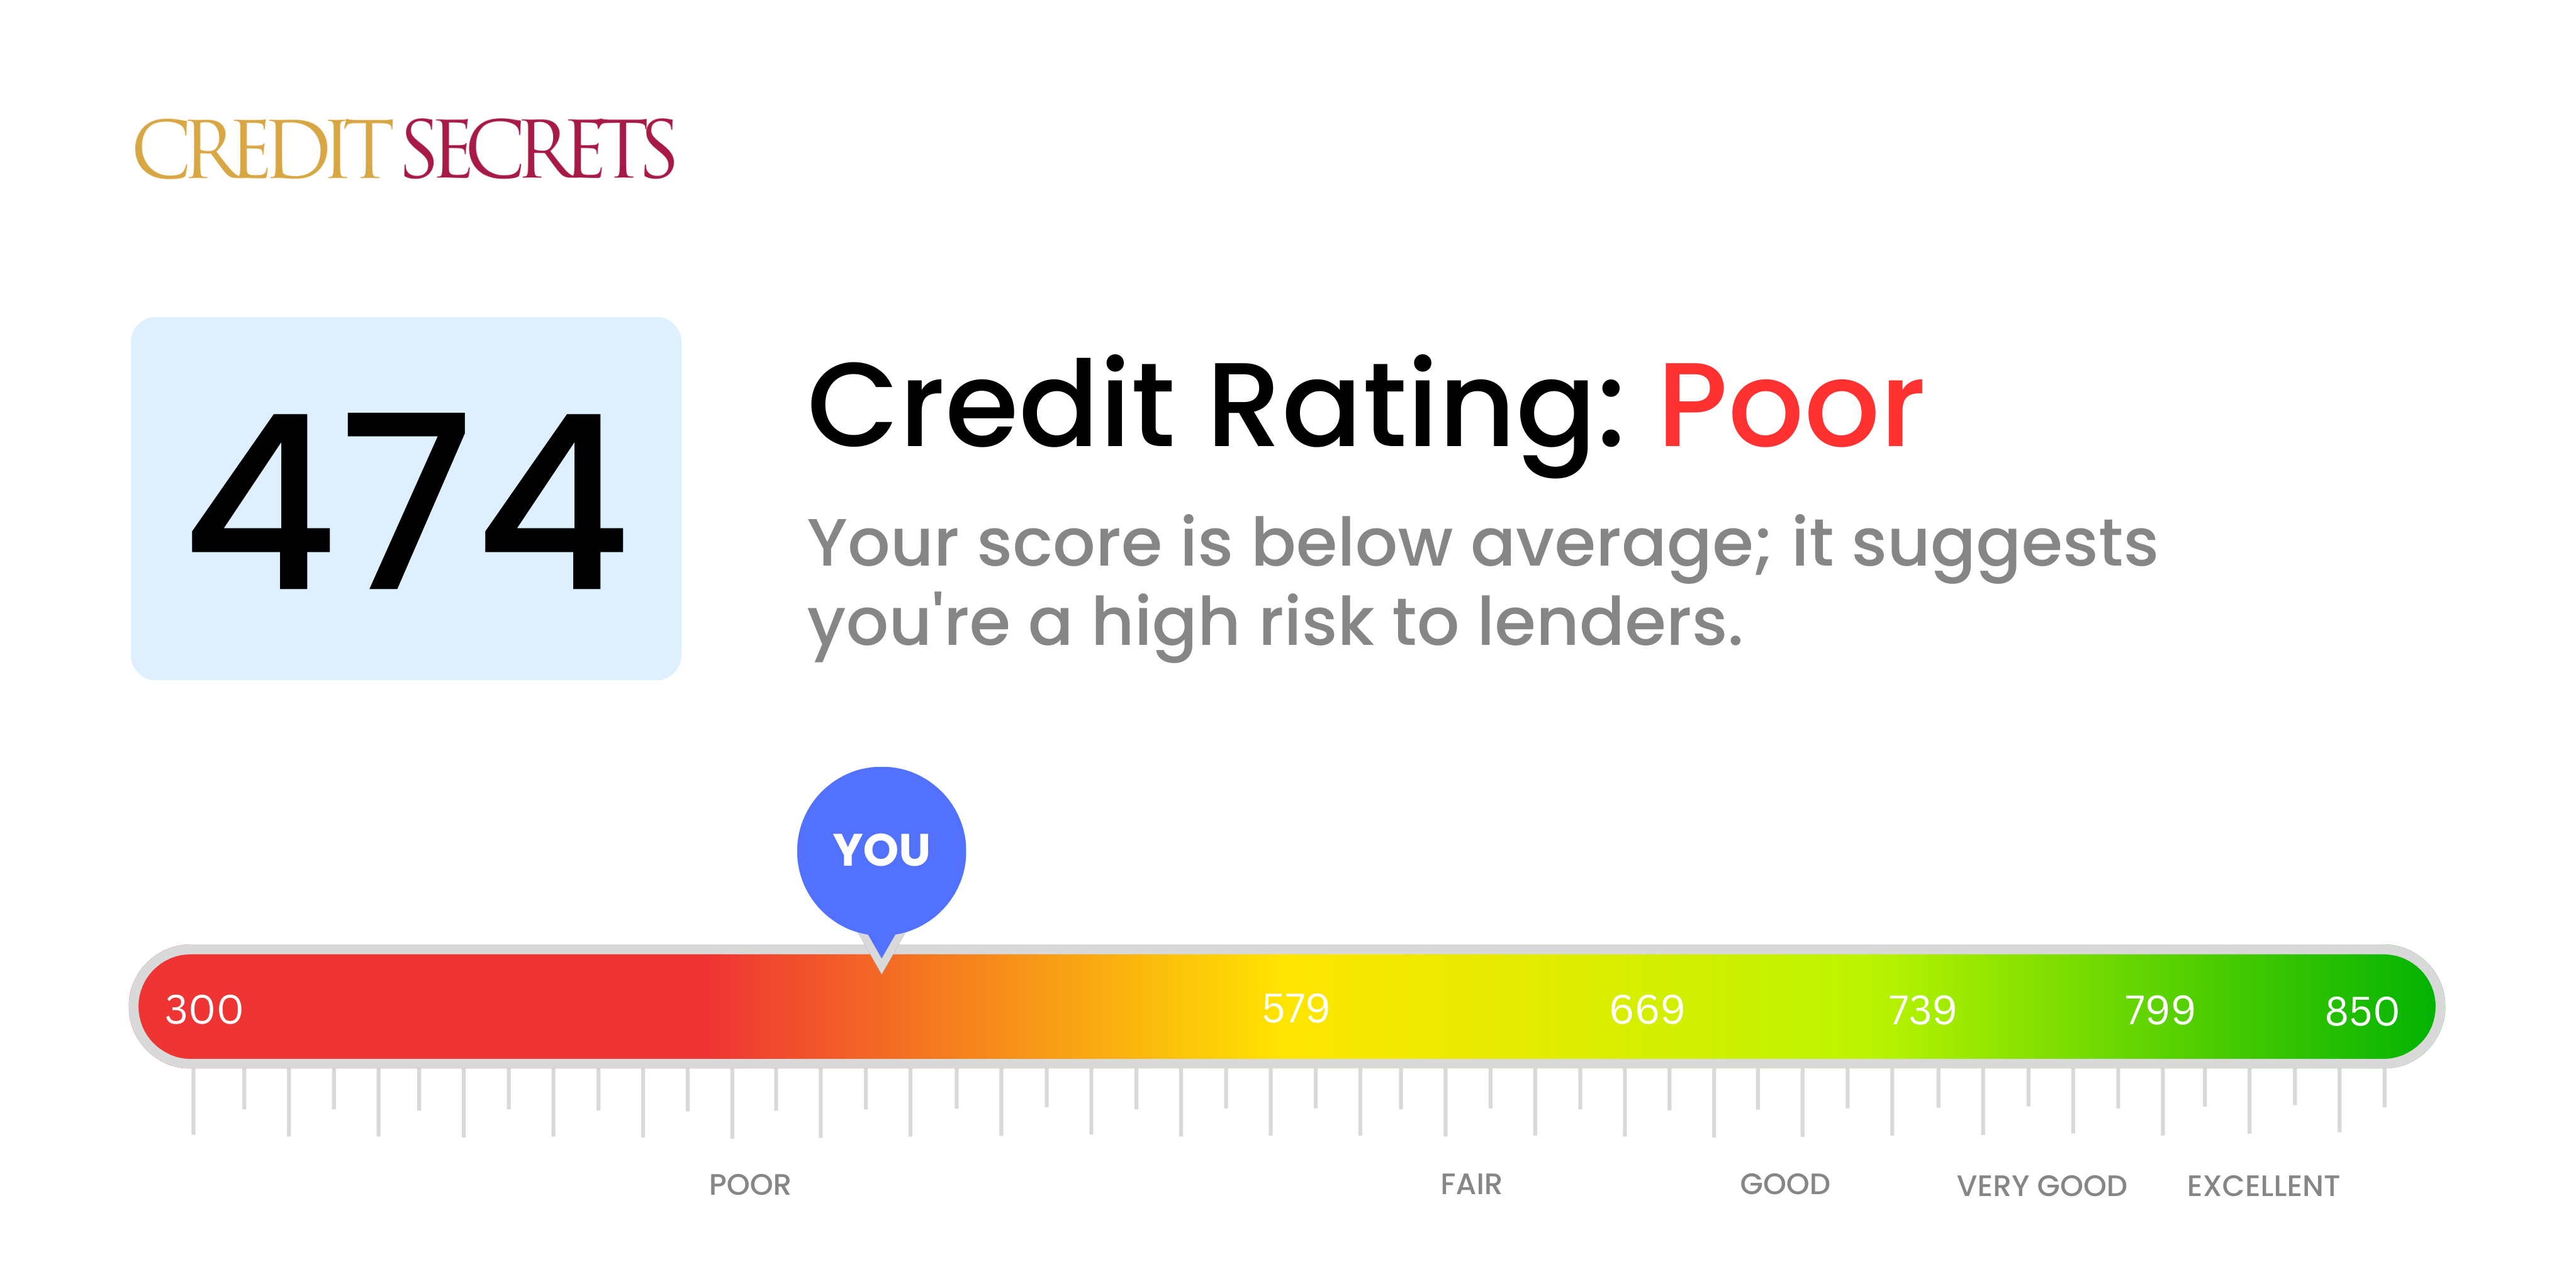 Is 474 a good credit score?